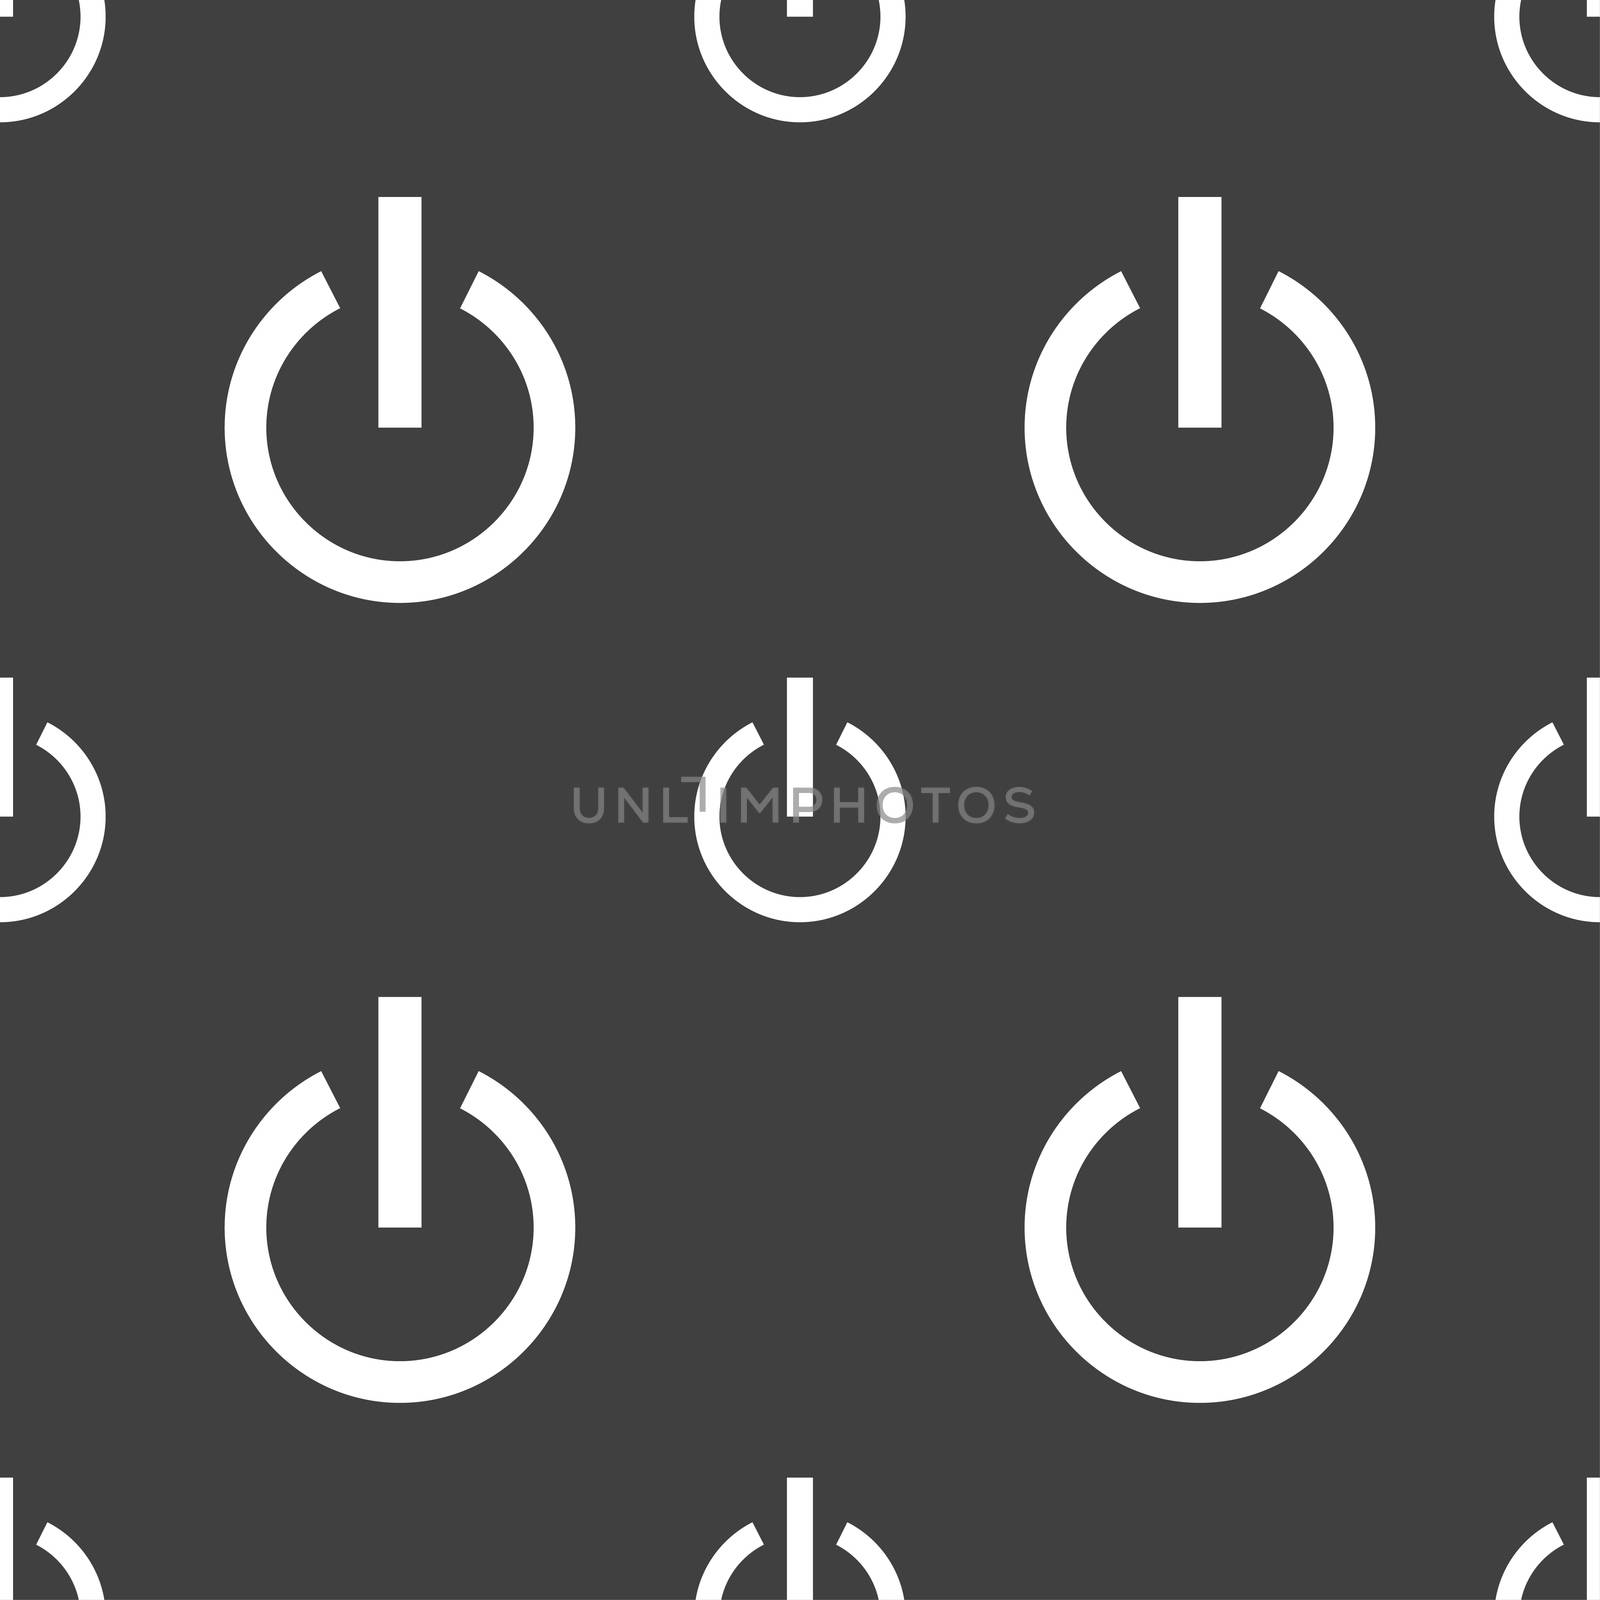 Power icon sign. Seamless pattern on a gray background. illustration